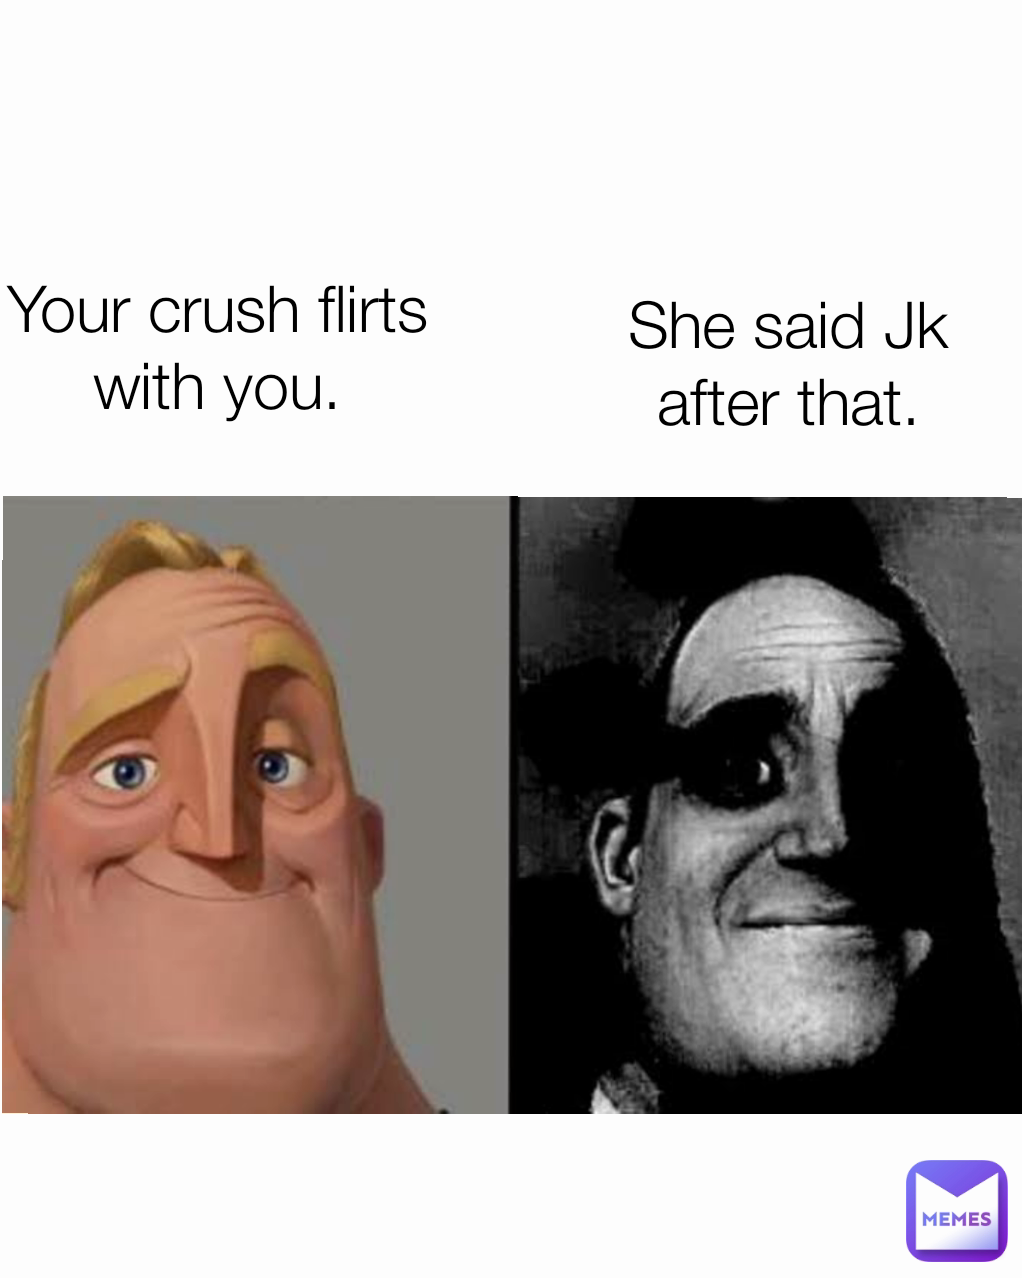 Your crush flirts with you. She said Jk after that.